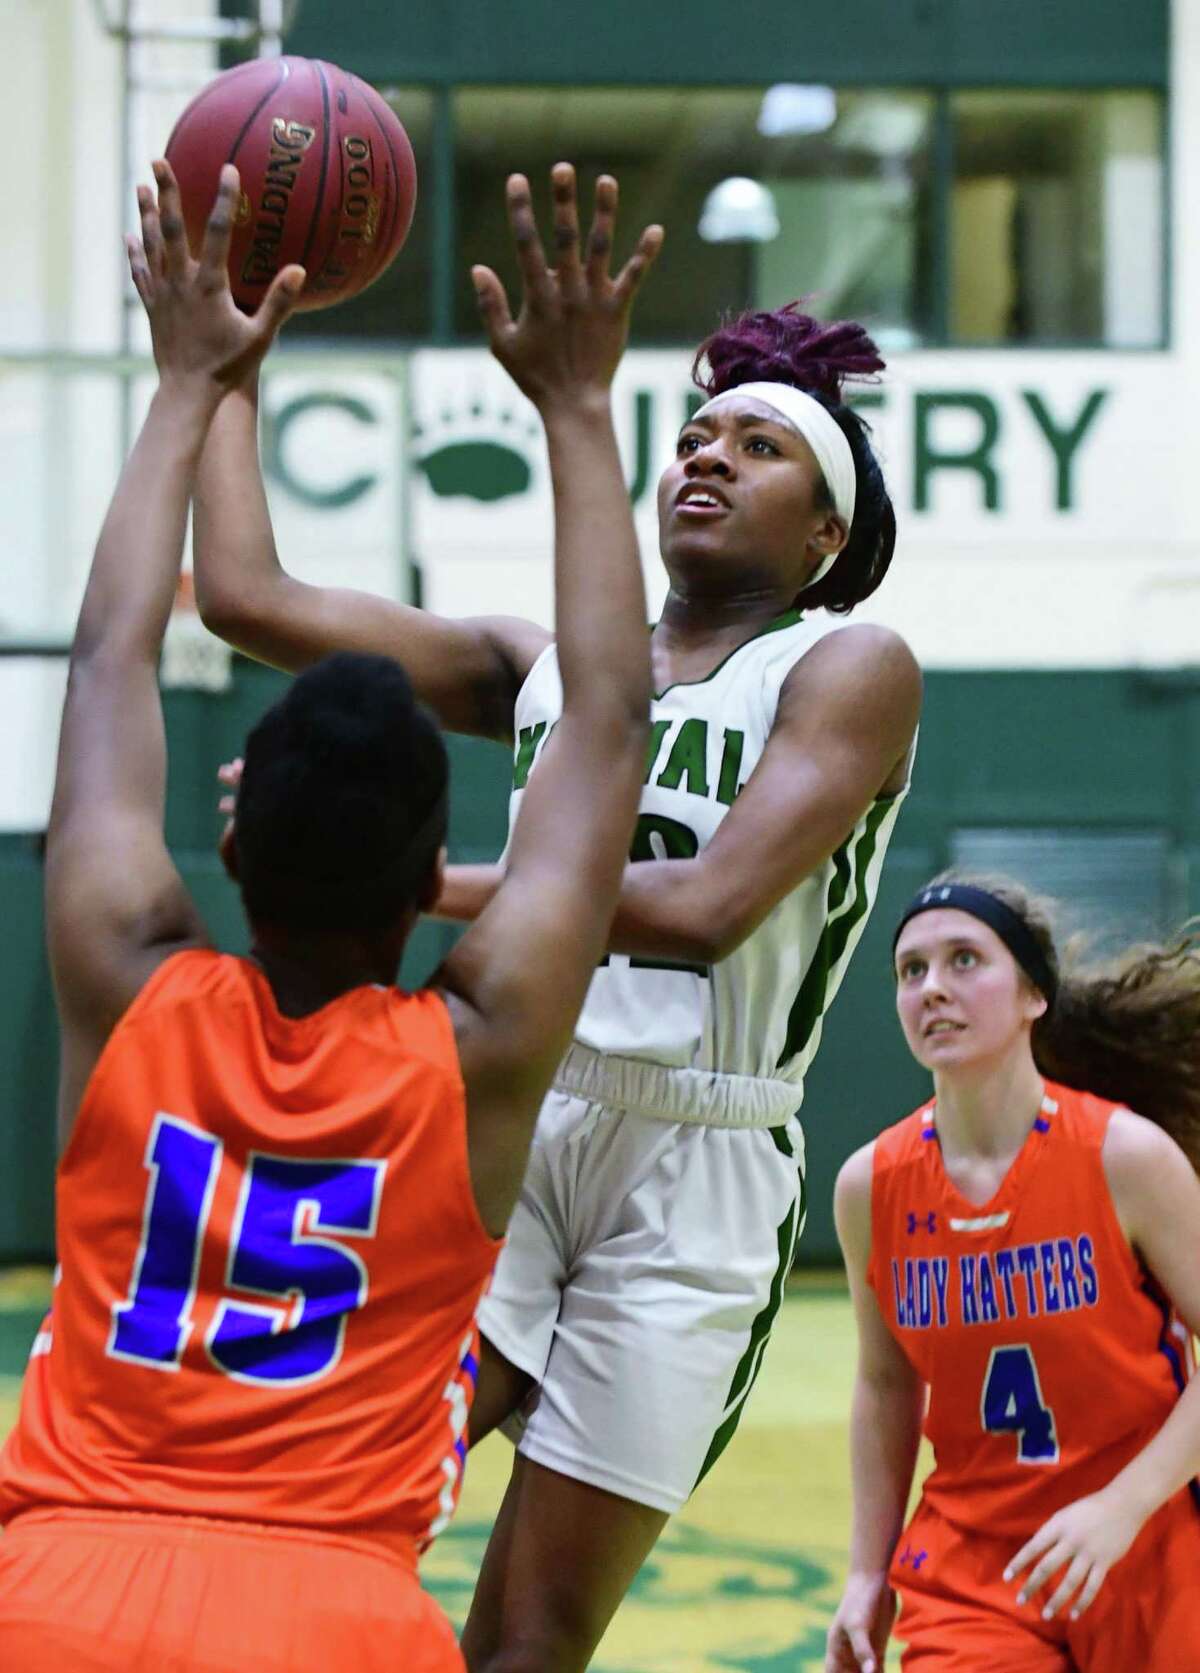 Norwalk’s Sanaa Boyd goes up for the shot in Friday’s game against Danbury.